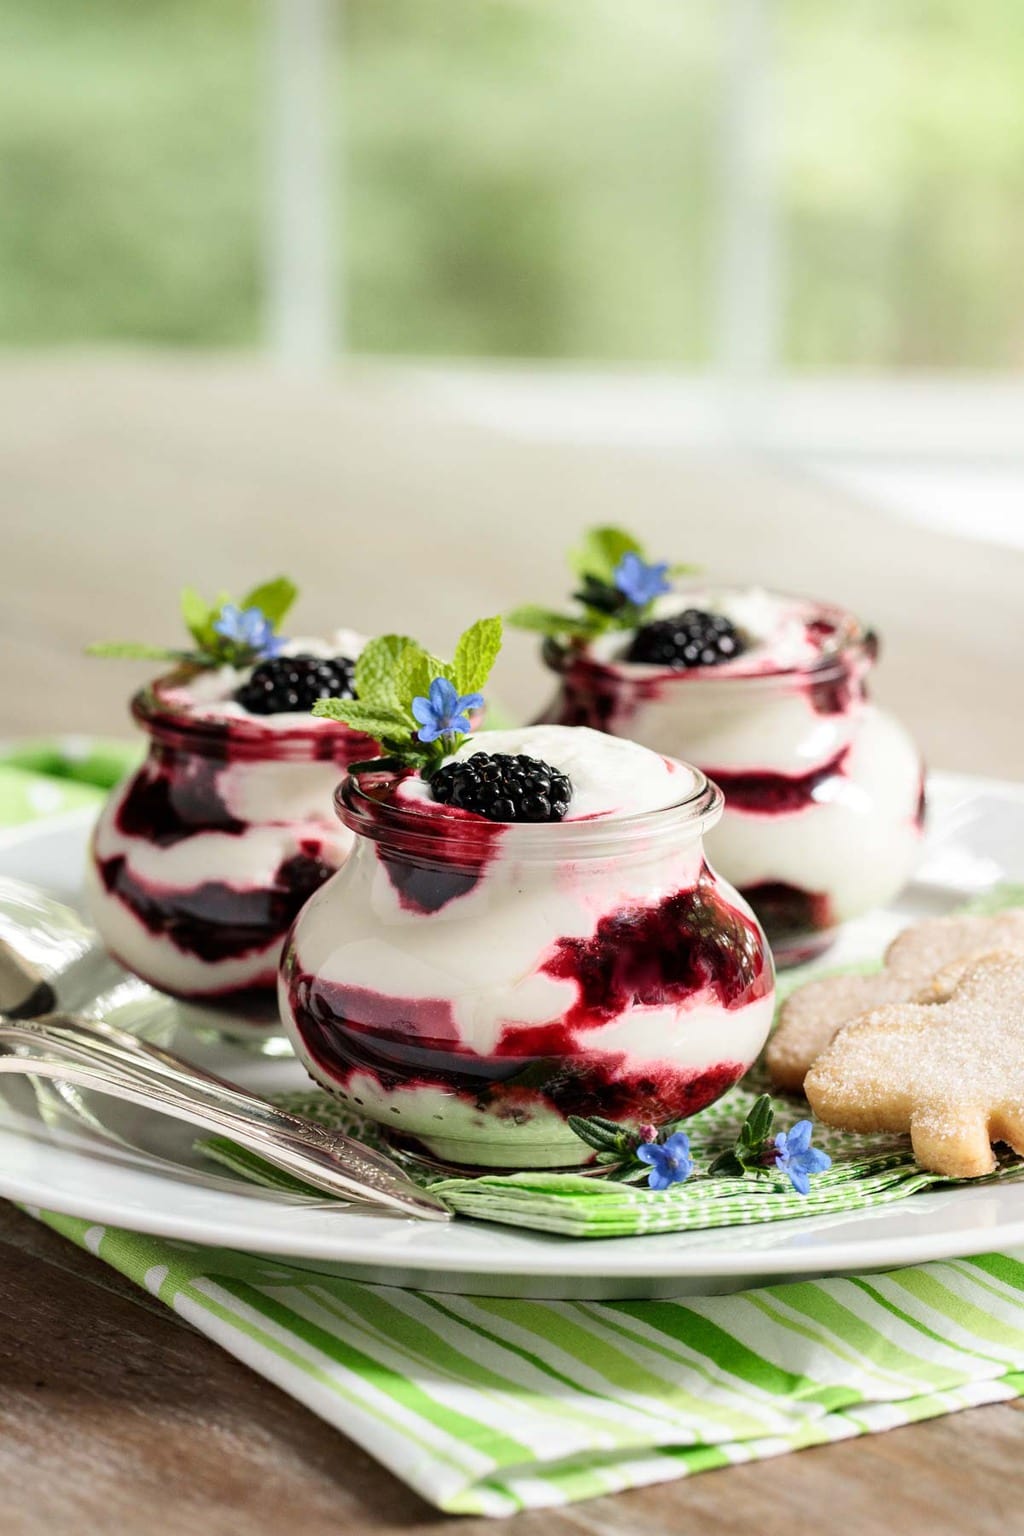 Photo of a white serving plate filled with Irish Blackberry Fool desserts in individual glass serving containers.